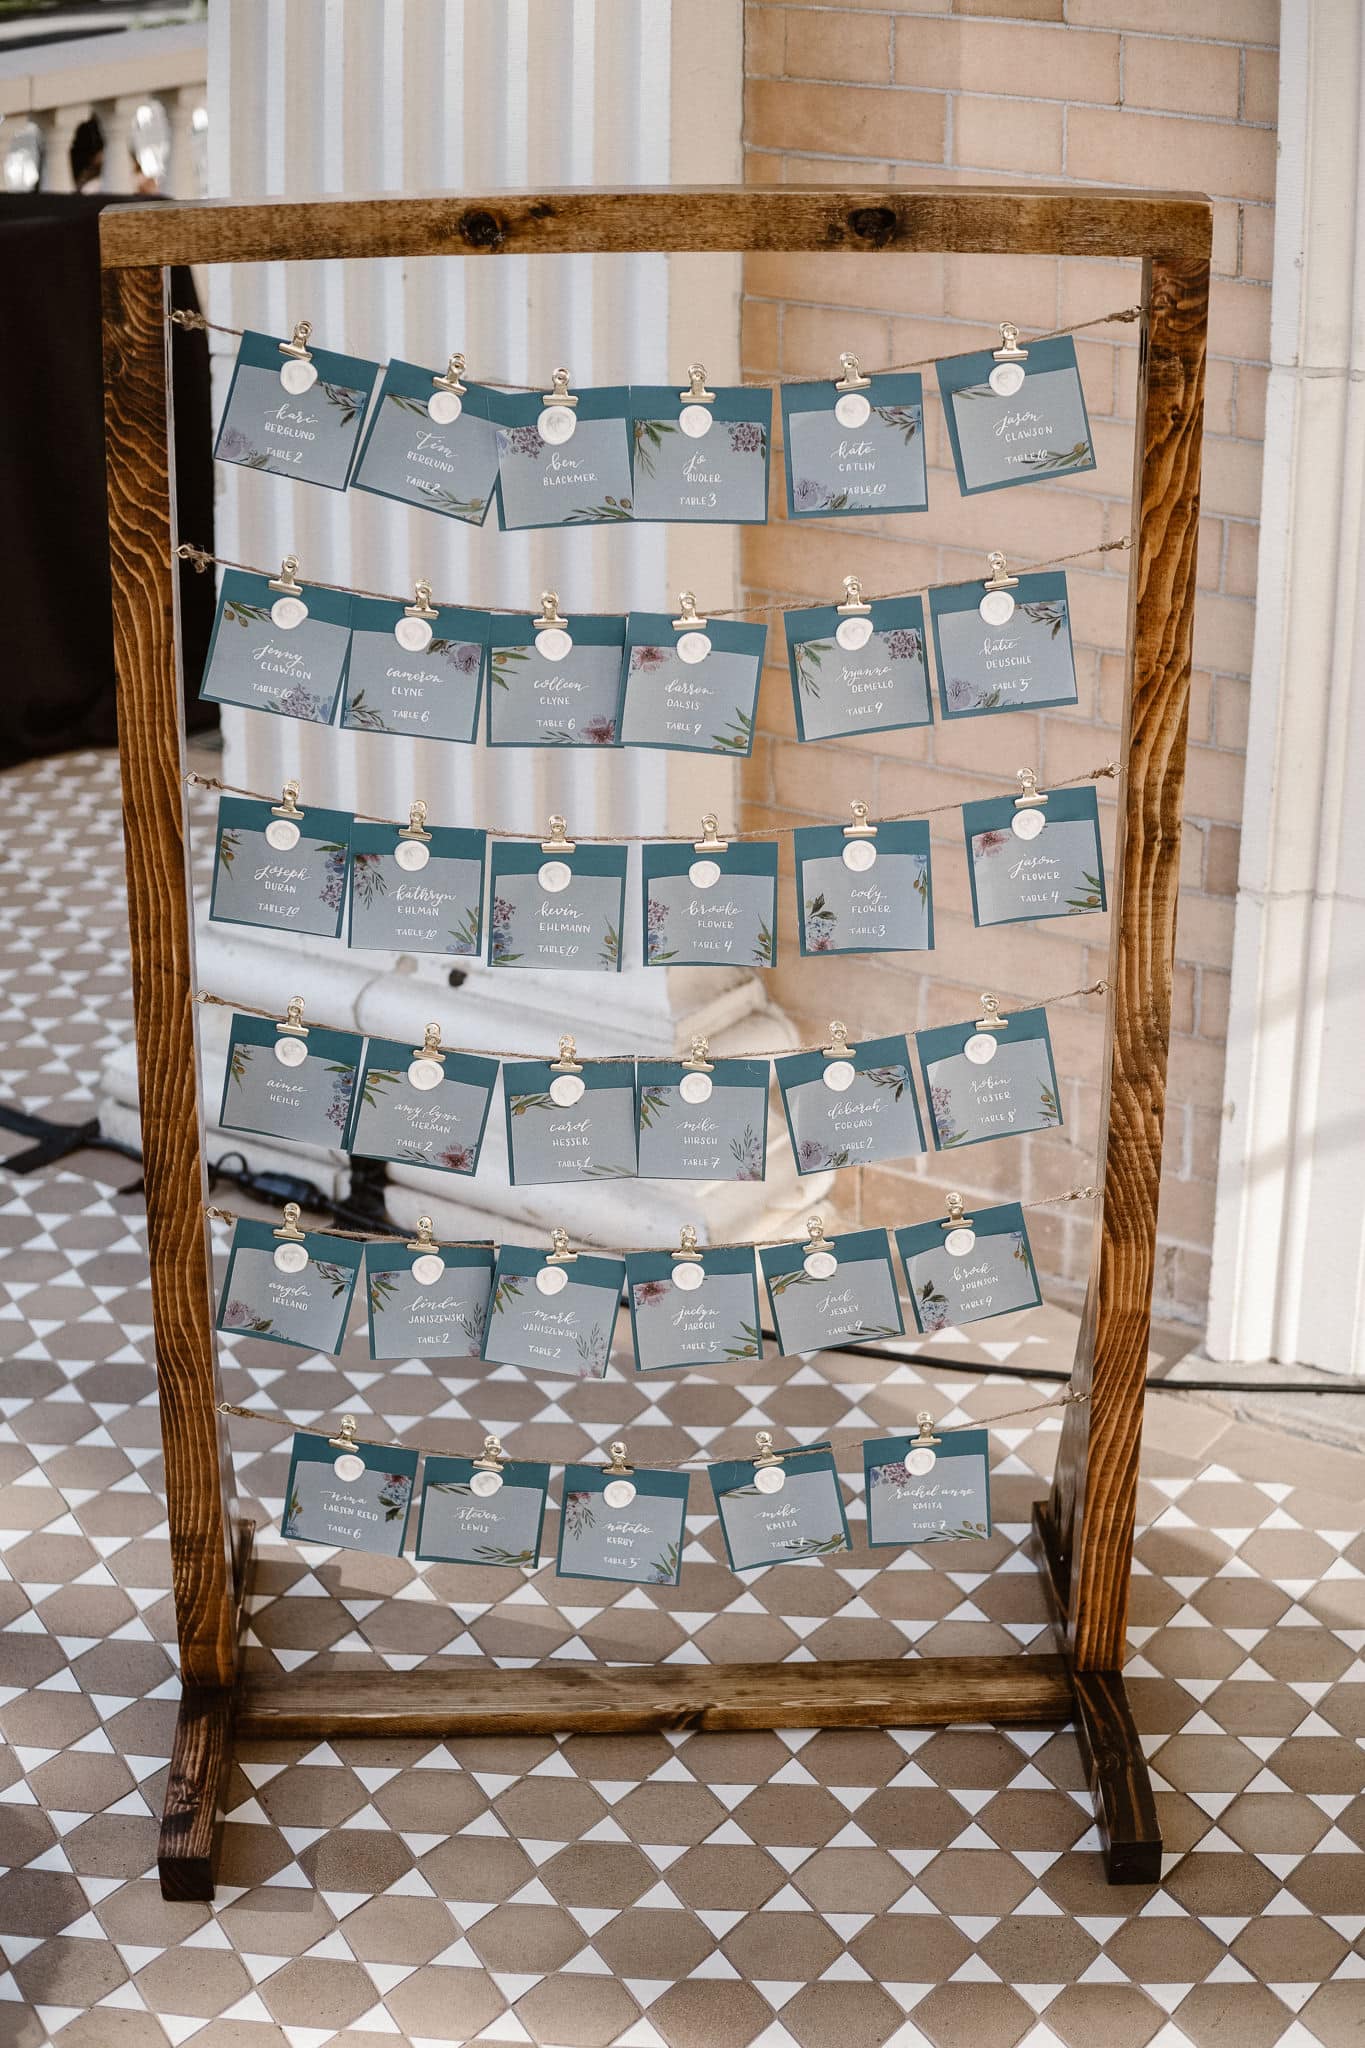 Grant Humphreys Mansion Wedding Photographer, Denver wedding photographer, Colorado wedding photographer, watercolor wedding place cards